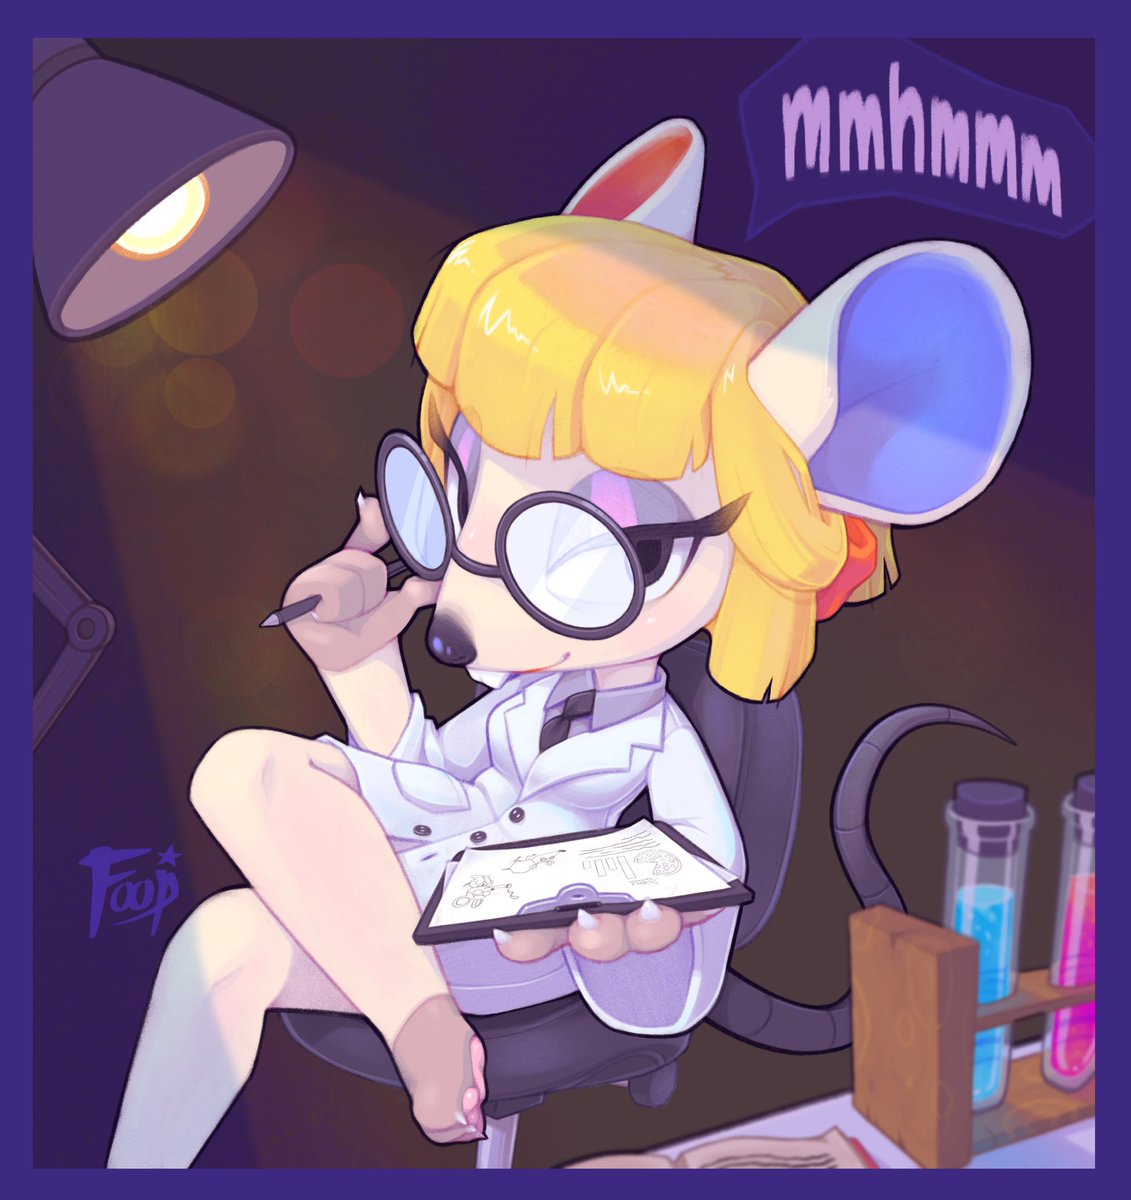 petri animal crossing. what is she studying